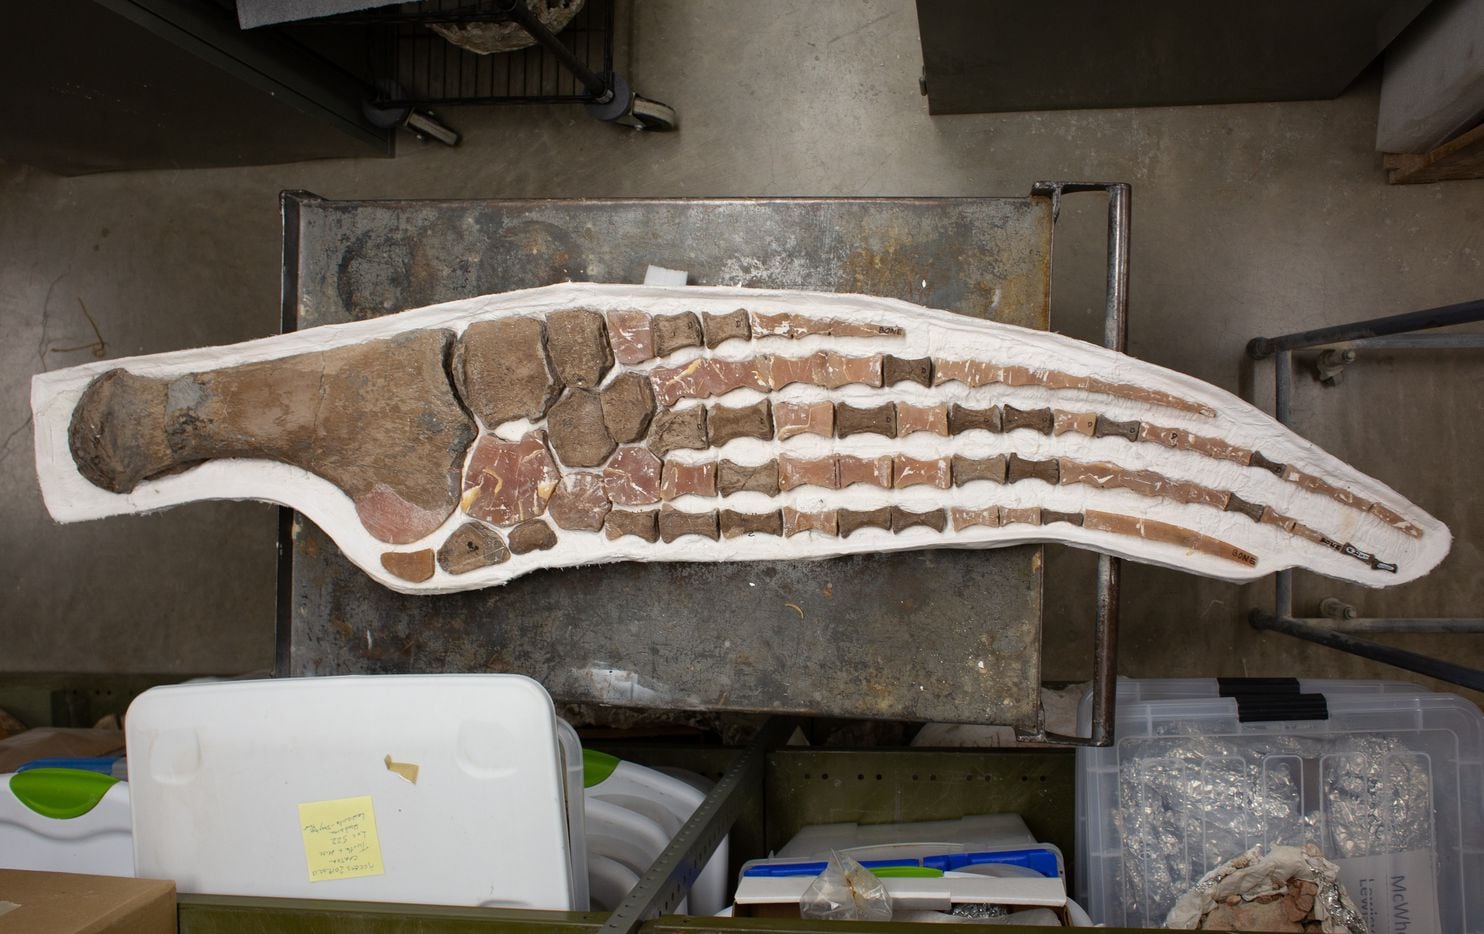 An assembly of fossilized bones and epoxy resin molds of the right front flipper of a plesiosaur is stored in the collection room at the Shuler Museum of Paleontology on Nov. 15, 2019 at Southern Methodist University in Dallas, Texas. (Kara Dry/Special Contributor)